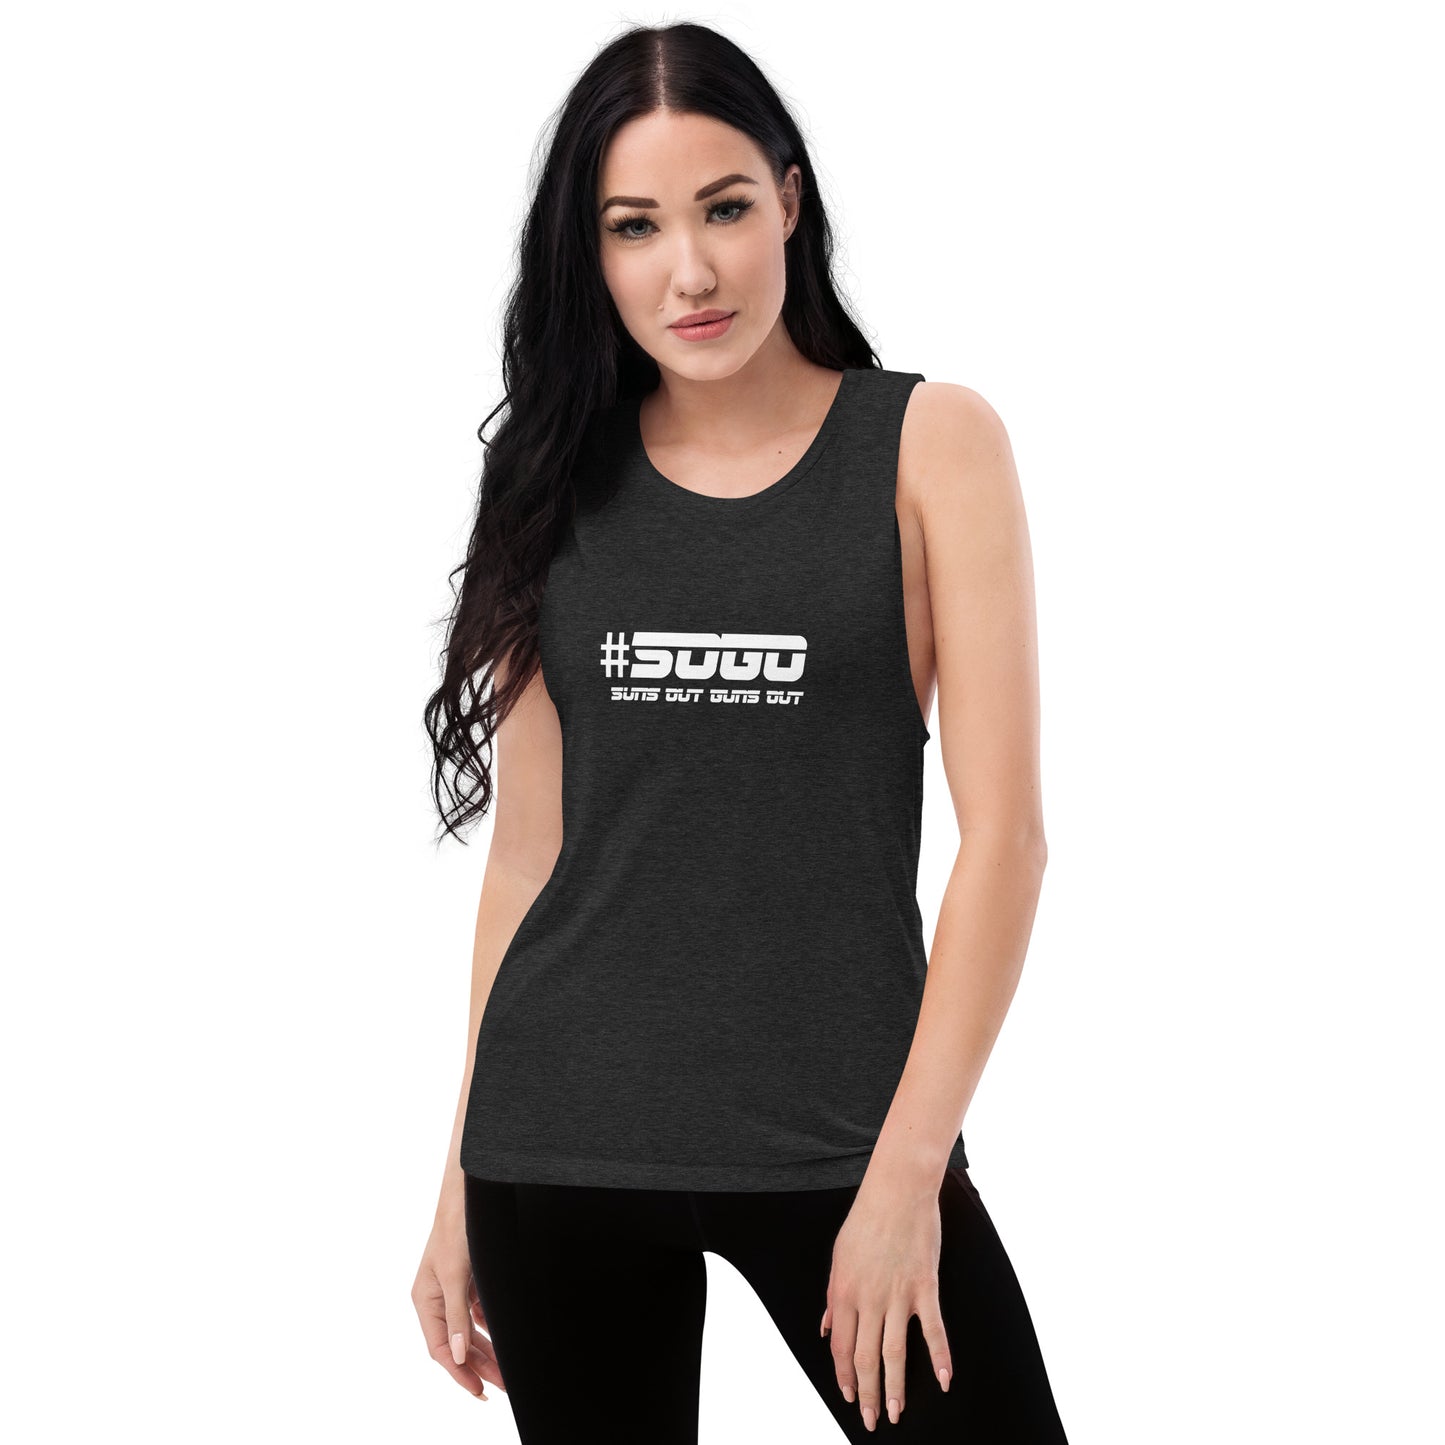 Snooty Fox Art Ladies’ Muscle Tank - SOGO (Suns out Guns out)